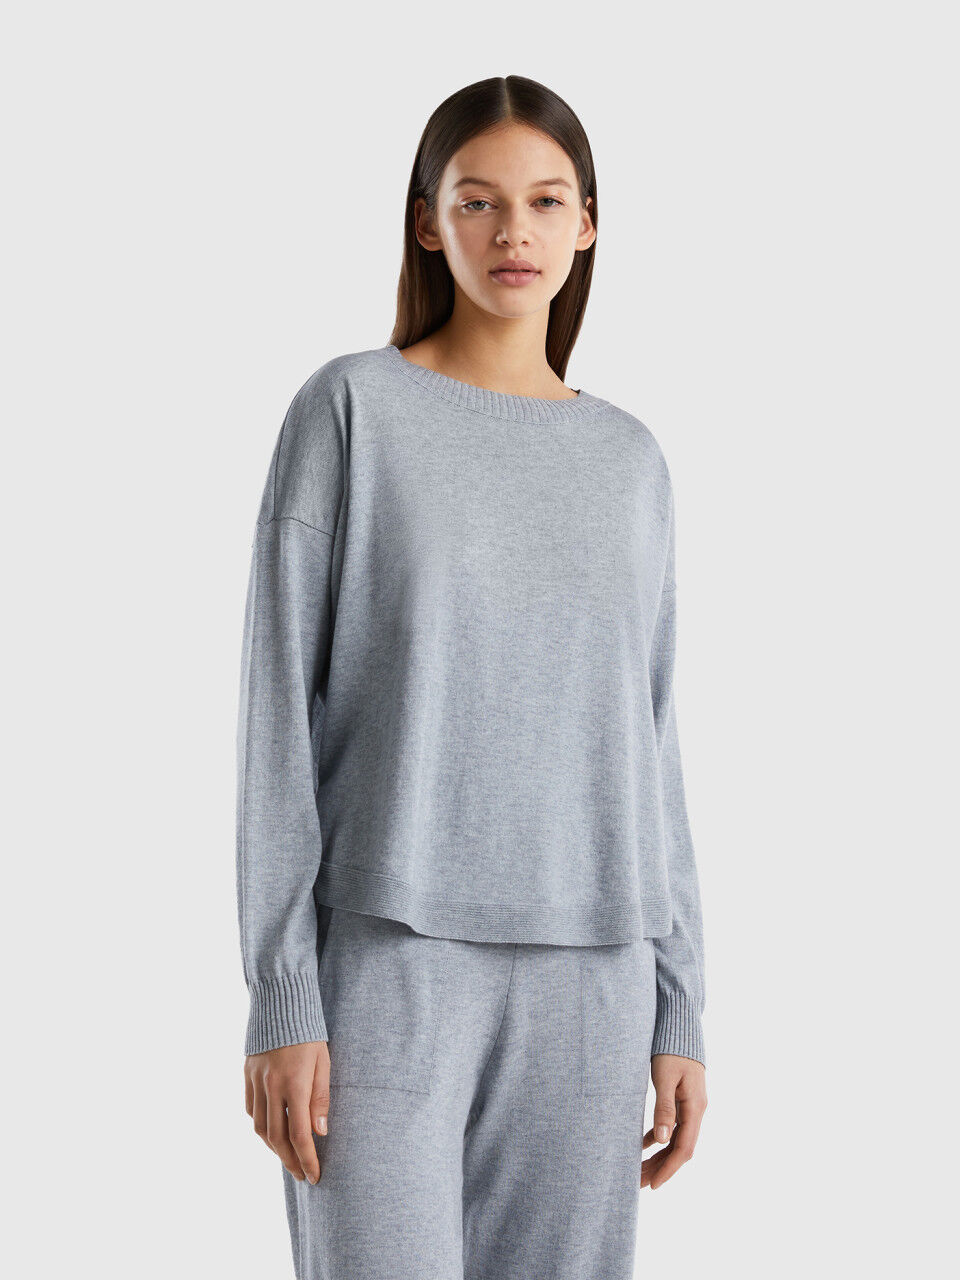 Top in cashmere blend